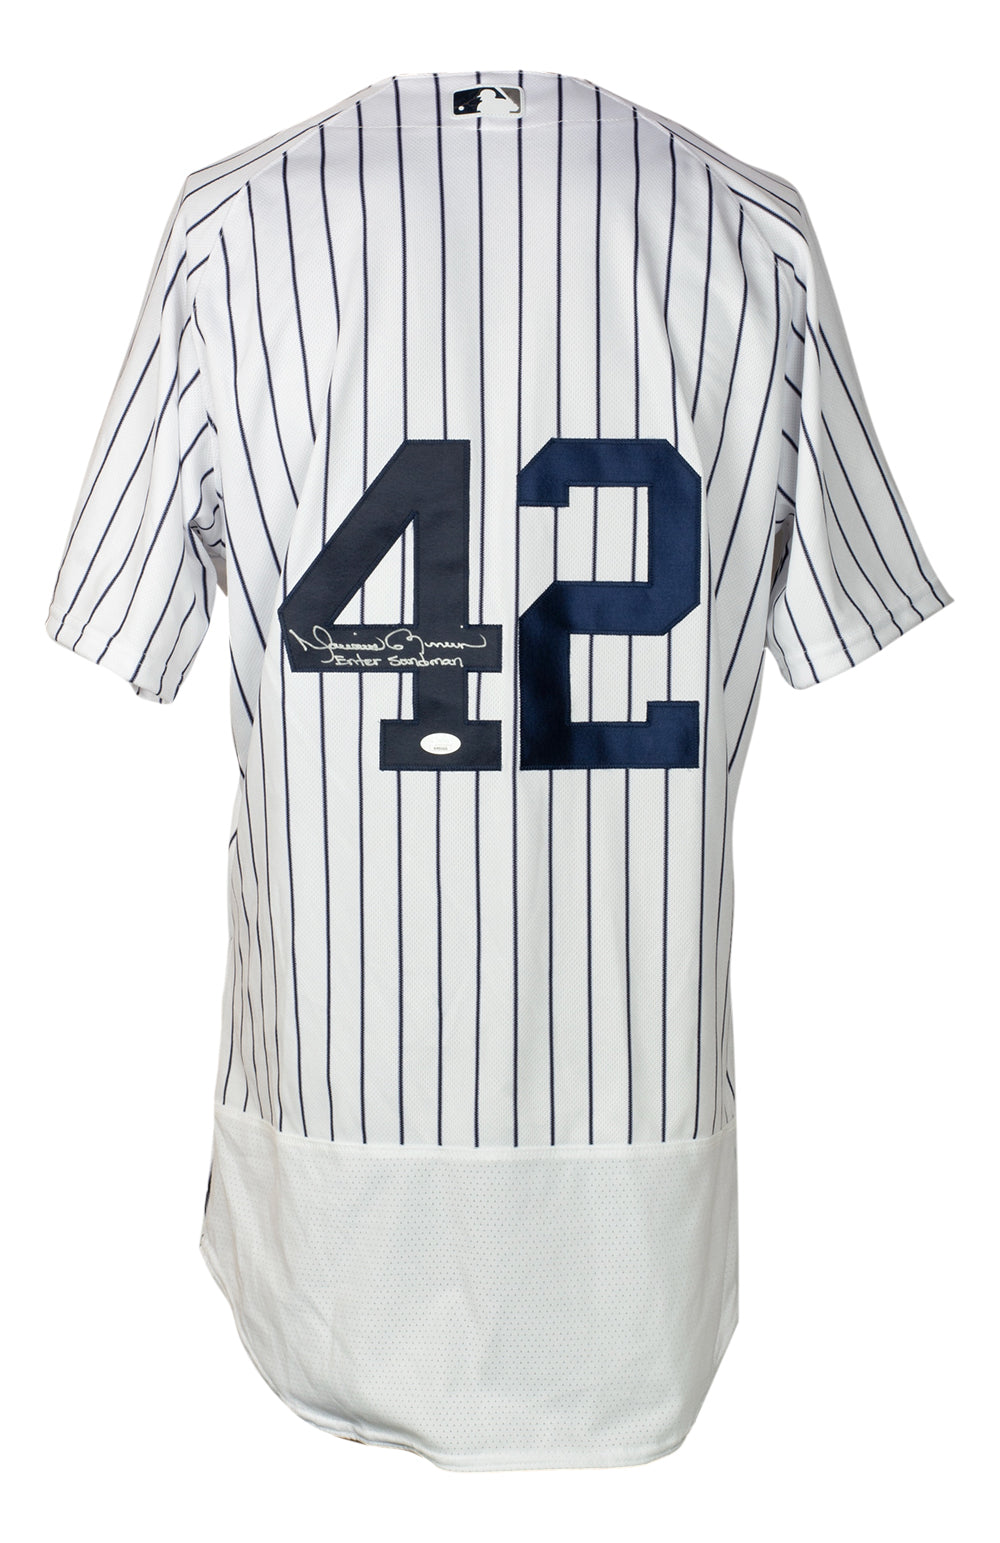 2004-08 NEW YORK YANKEES #3 MAJESTIC JERSEY (HOME) L